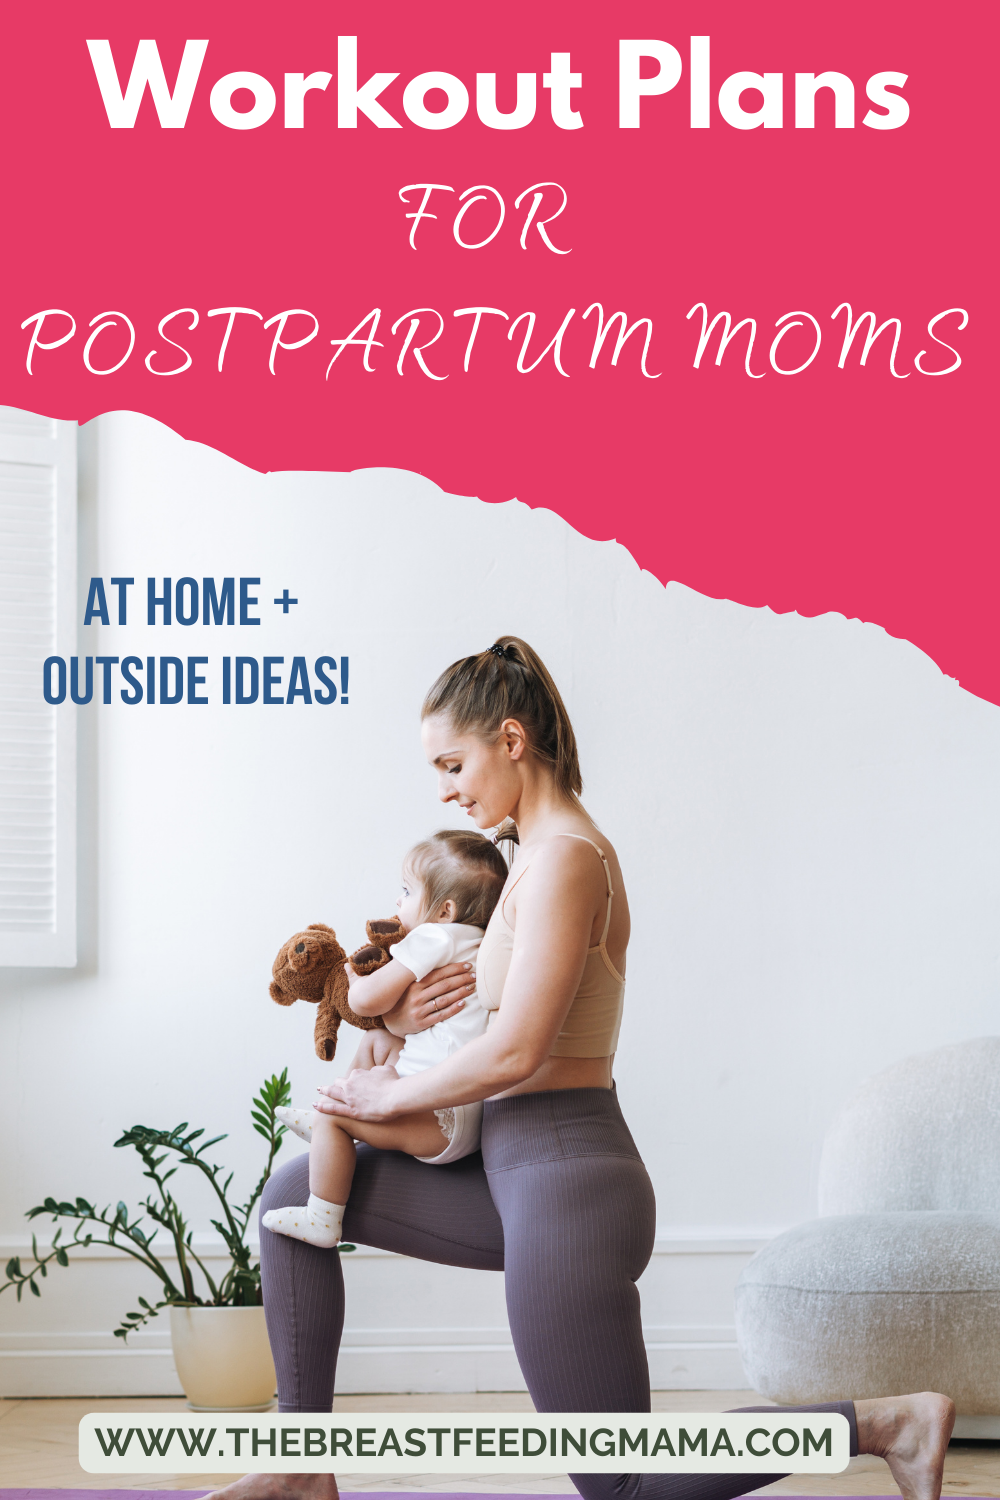 Discover the perfect exercises that fit seamlessly into your breastfeeding journey, because taking care of both your baby and yourself is a beautiful balancing act. Get ready to embrace a healthier, happier you as this article addresses the best exercises while breastfeeding plus a couple of workout plans to try!